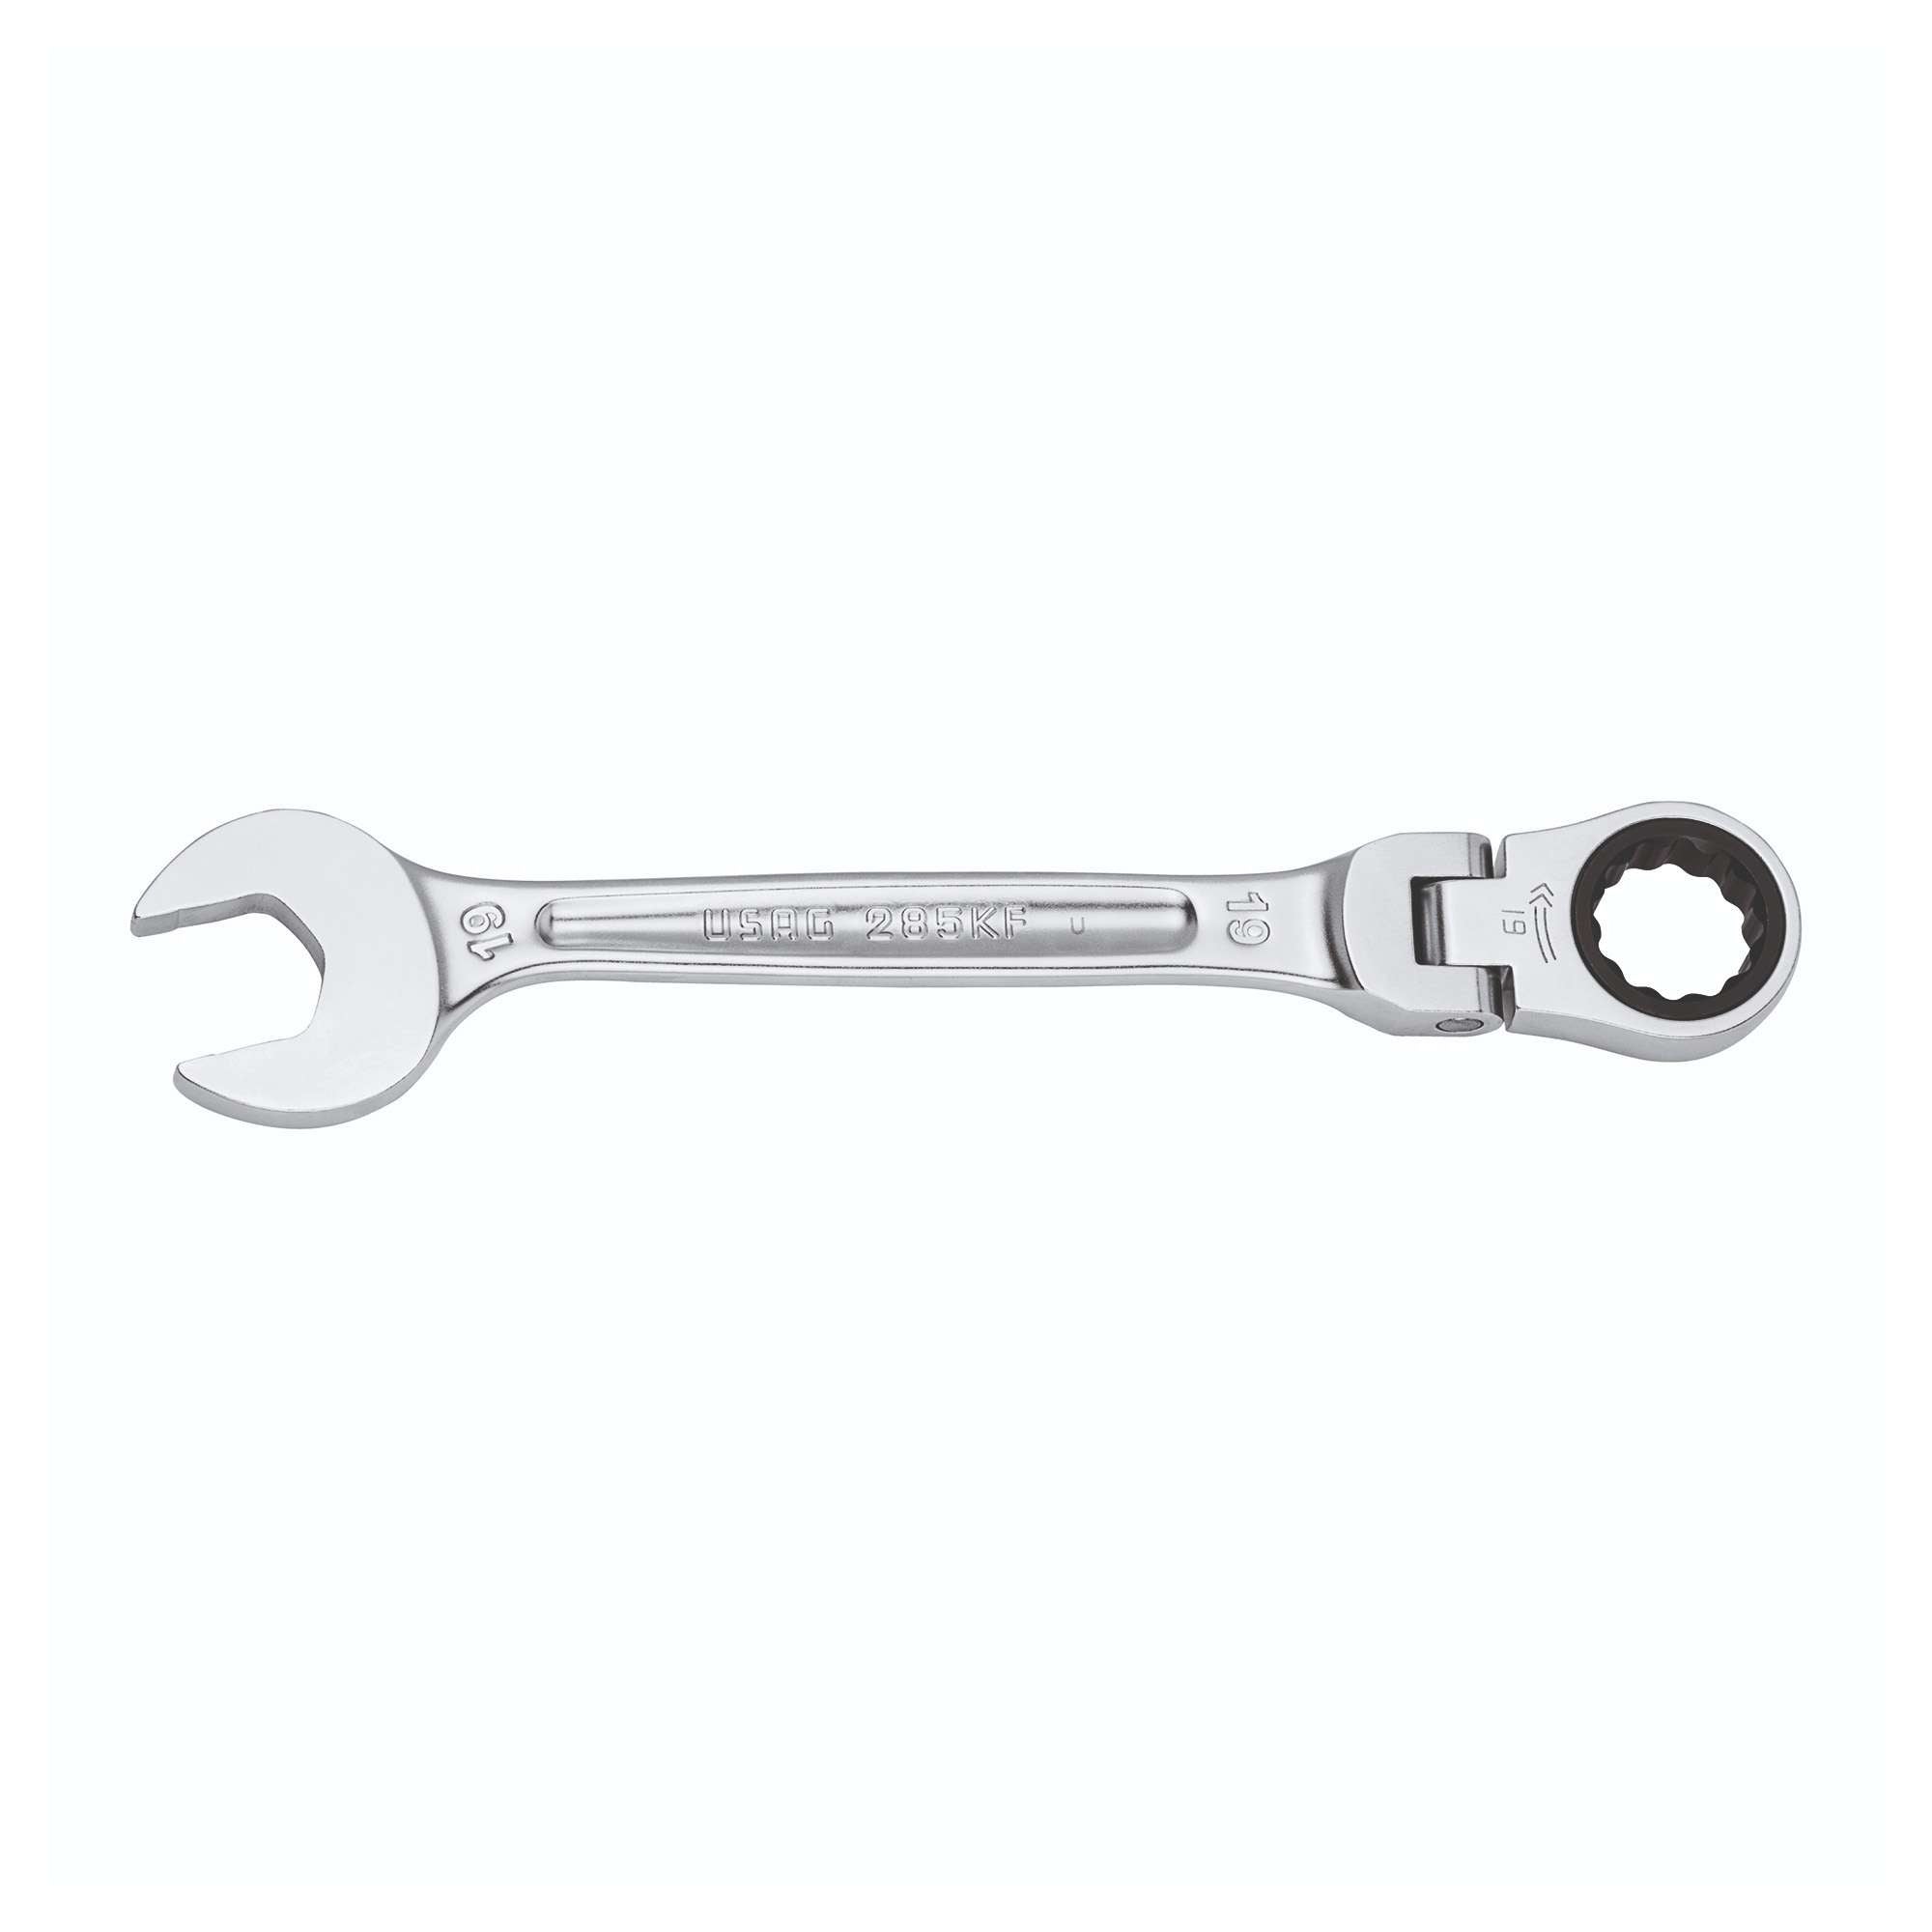 Hinged jointed reversible ratchet combination wrenches - Usag 285 KF